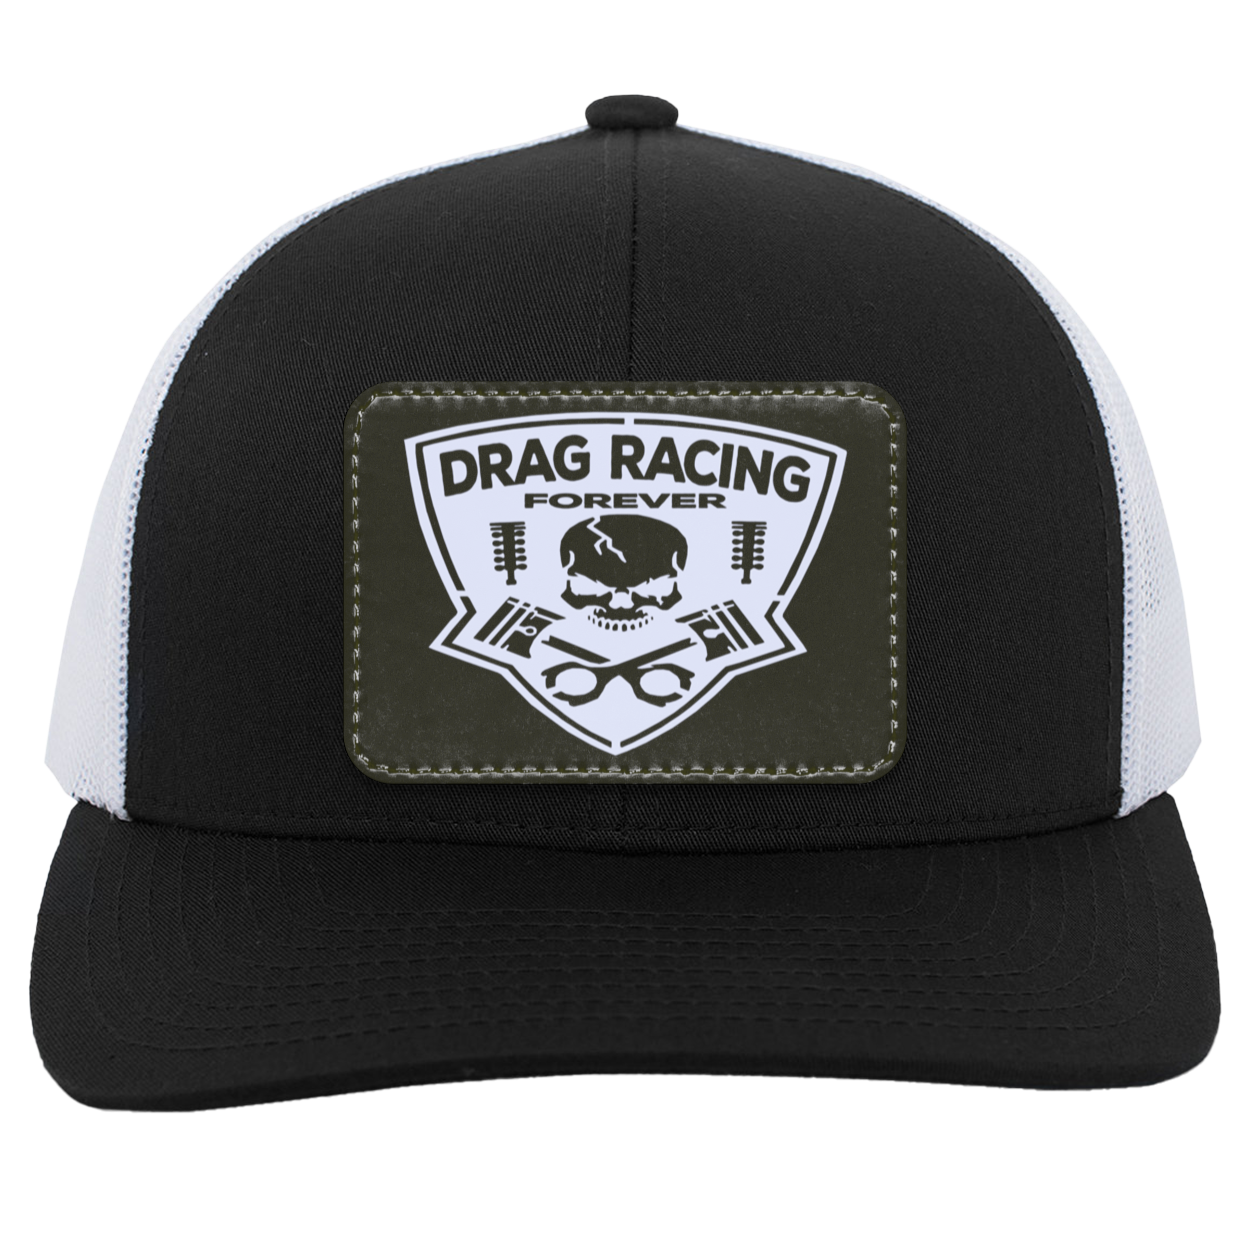 Drag Racing Forever Trucker Patched Snap Back